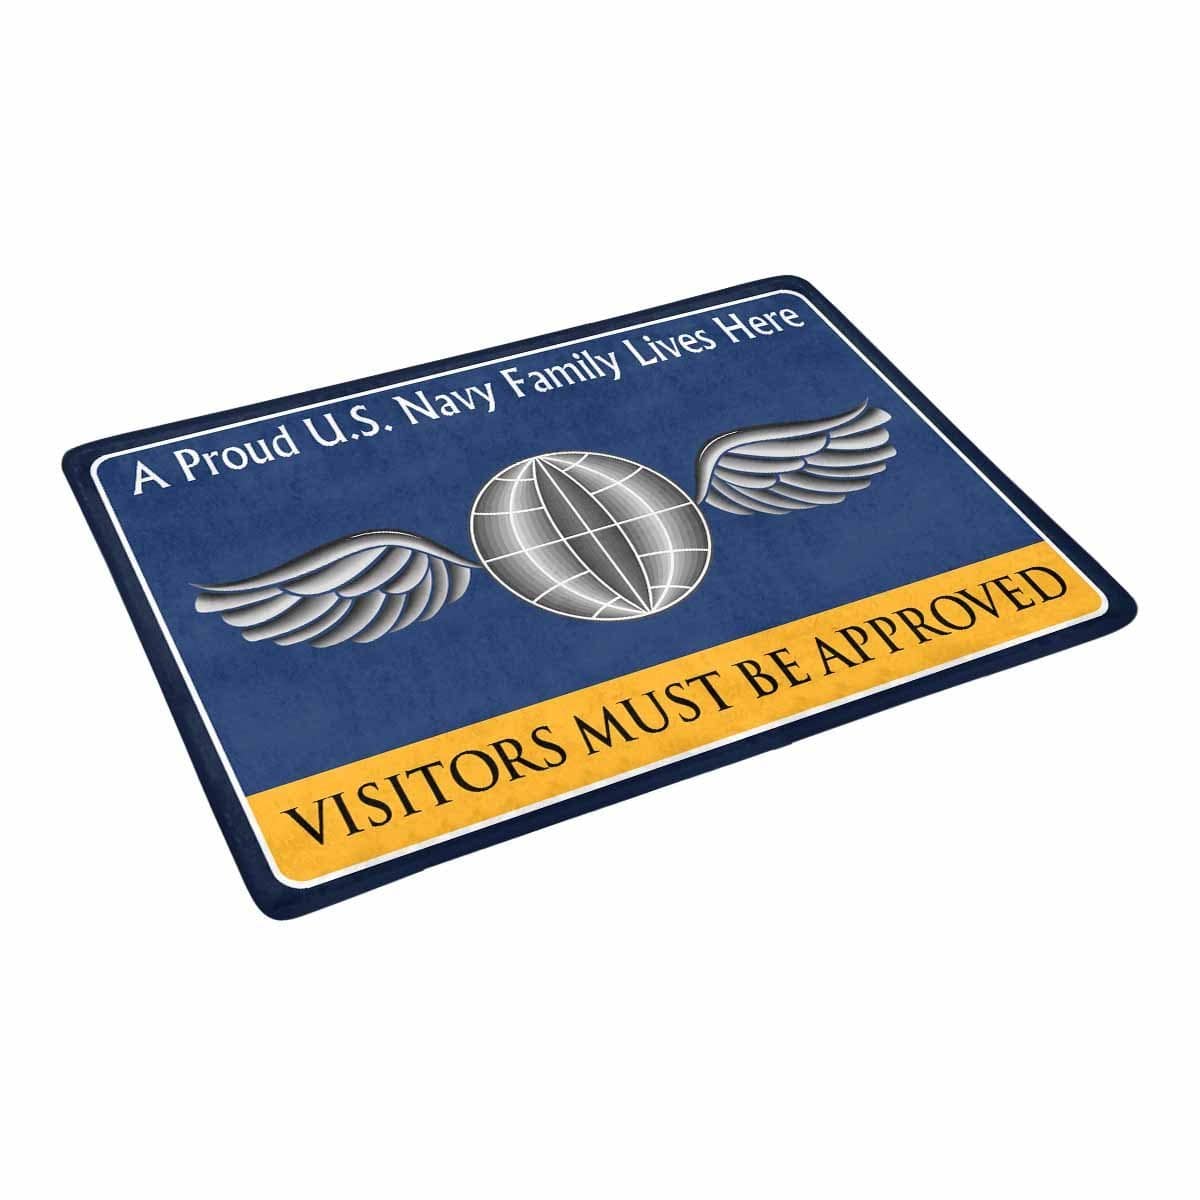 Navy Aviation Electricians Mate Navy AE Family Doormat - Visitors must be approved (23,6 inches x 15,7 inches)-Doormat-Navy-Rate-Veterans Nation